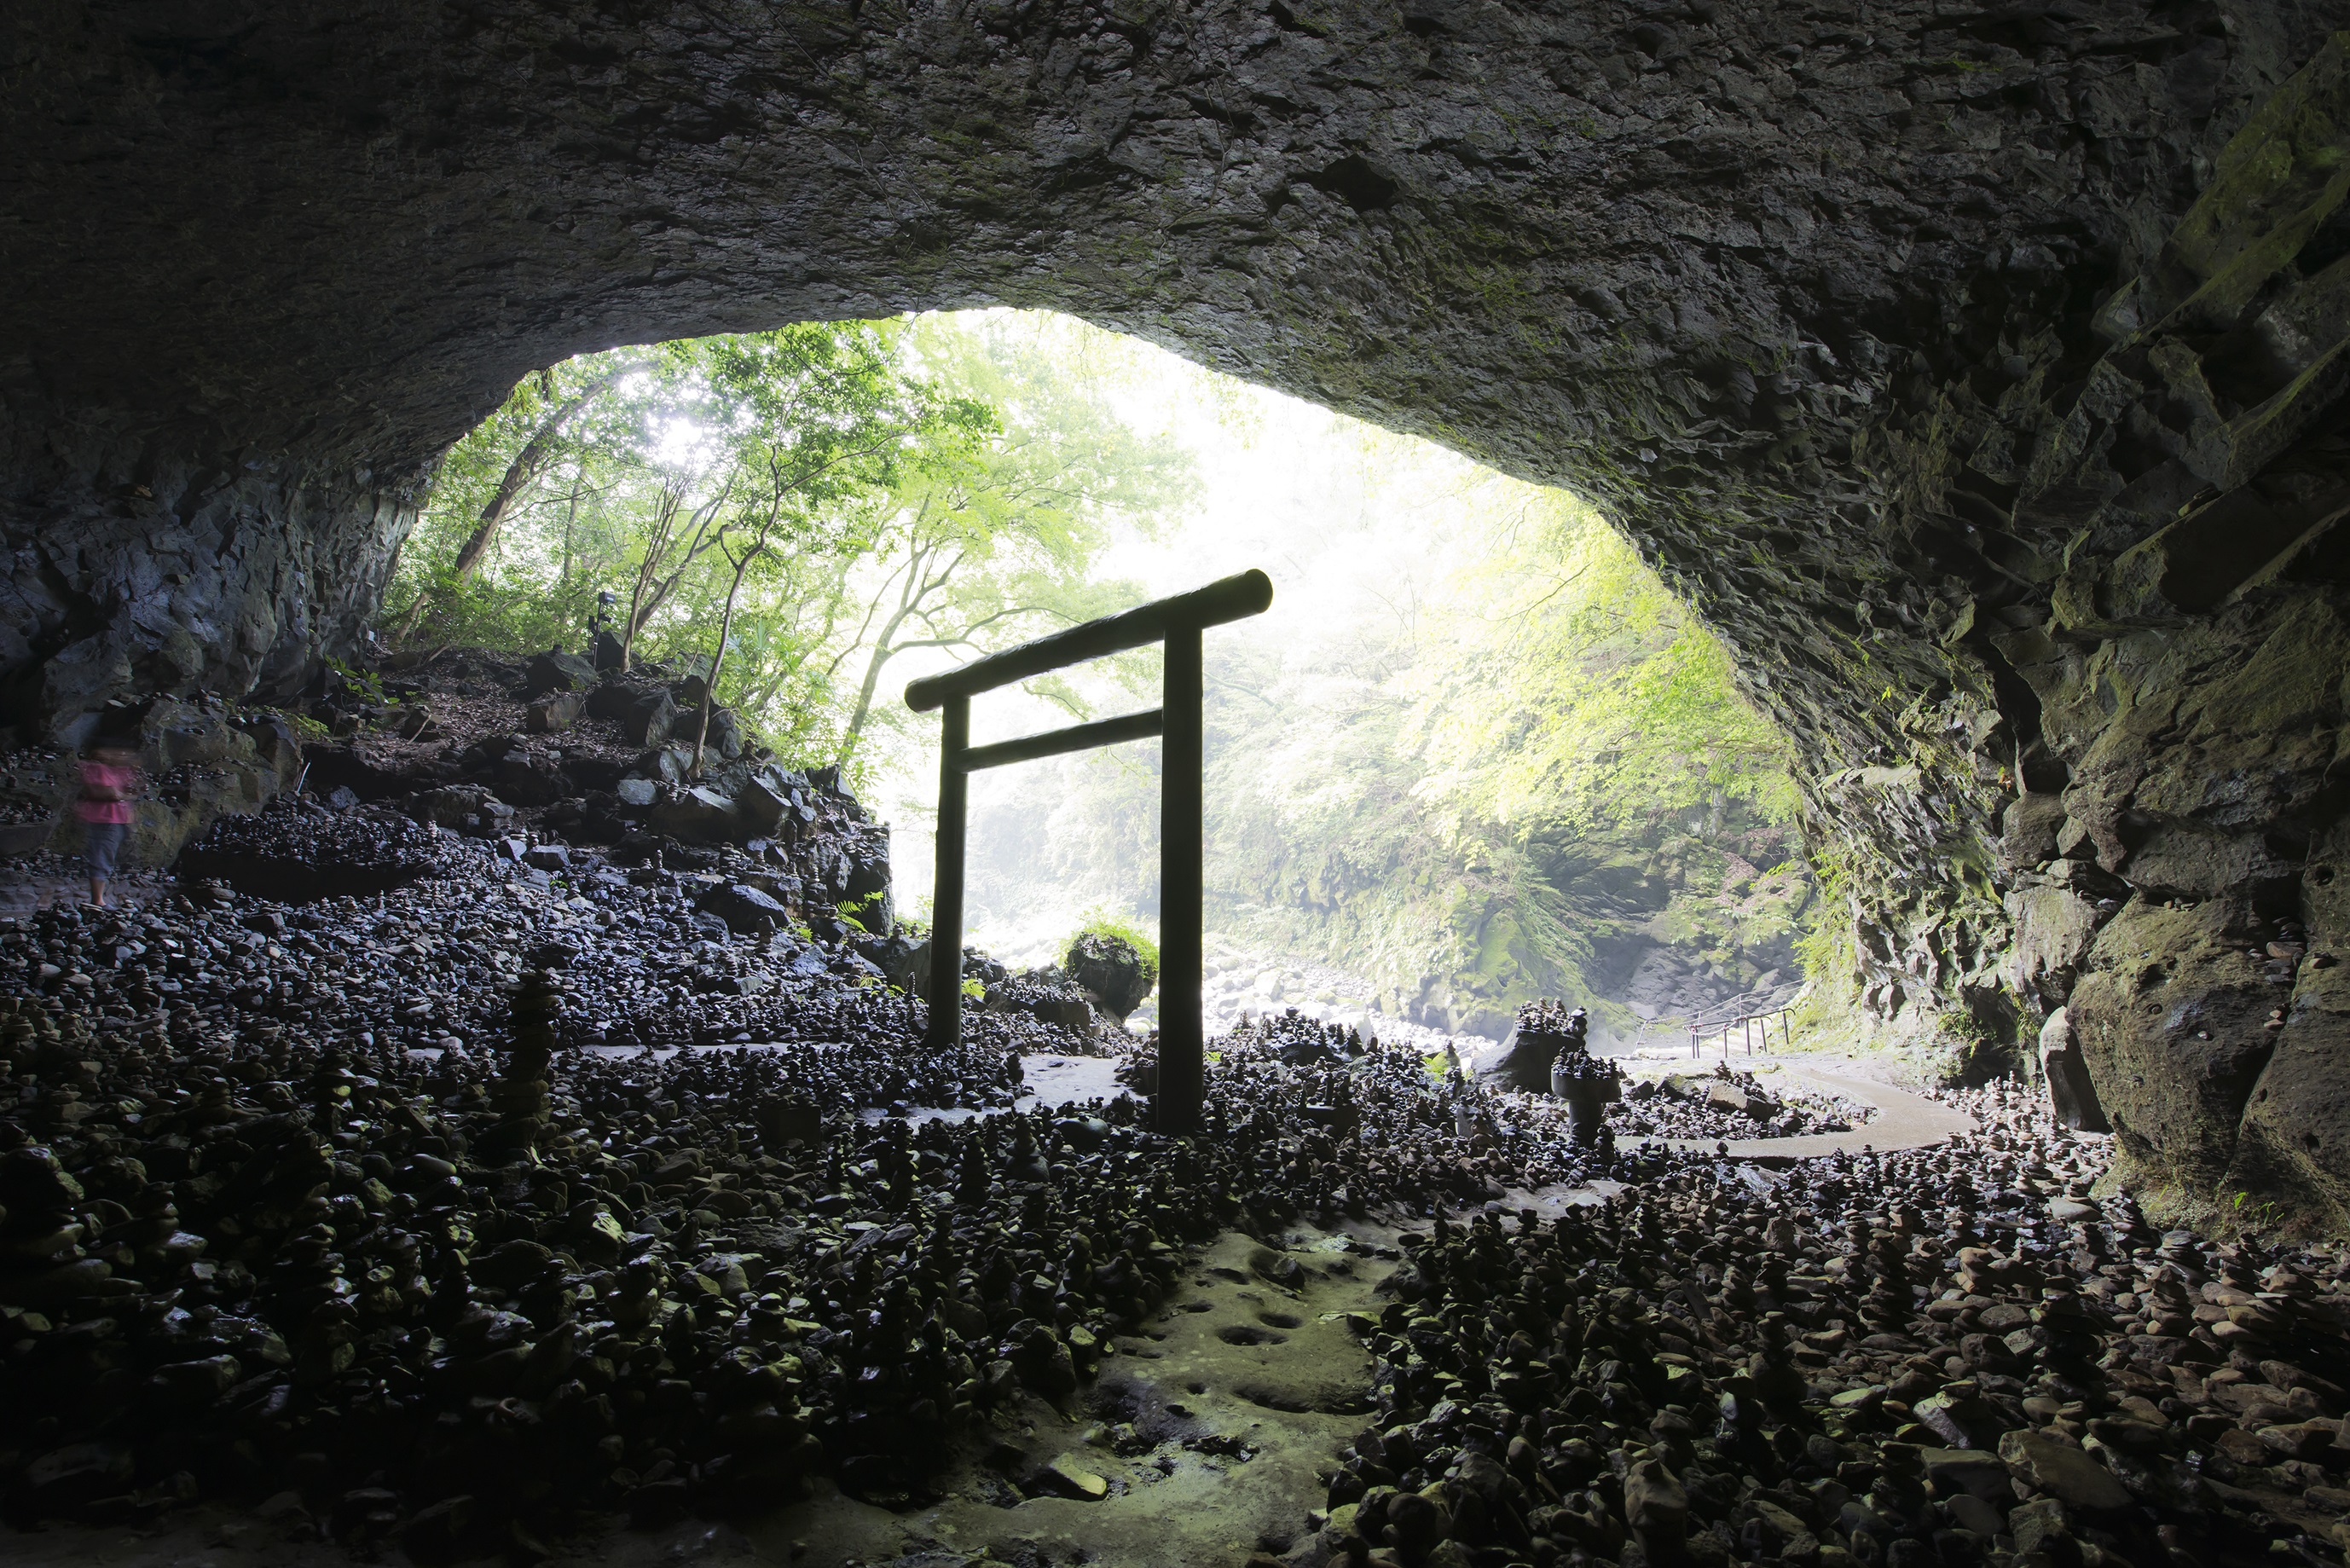 Takachiho, Ama no Yasukawara — the place where eight million troubled deities supposedly congregated at the riverbed when Amaterasu hid in the cave.